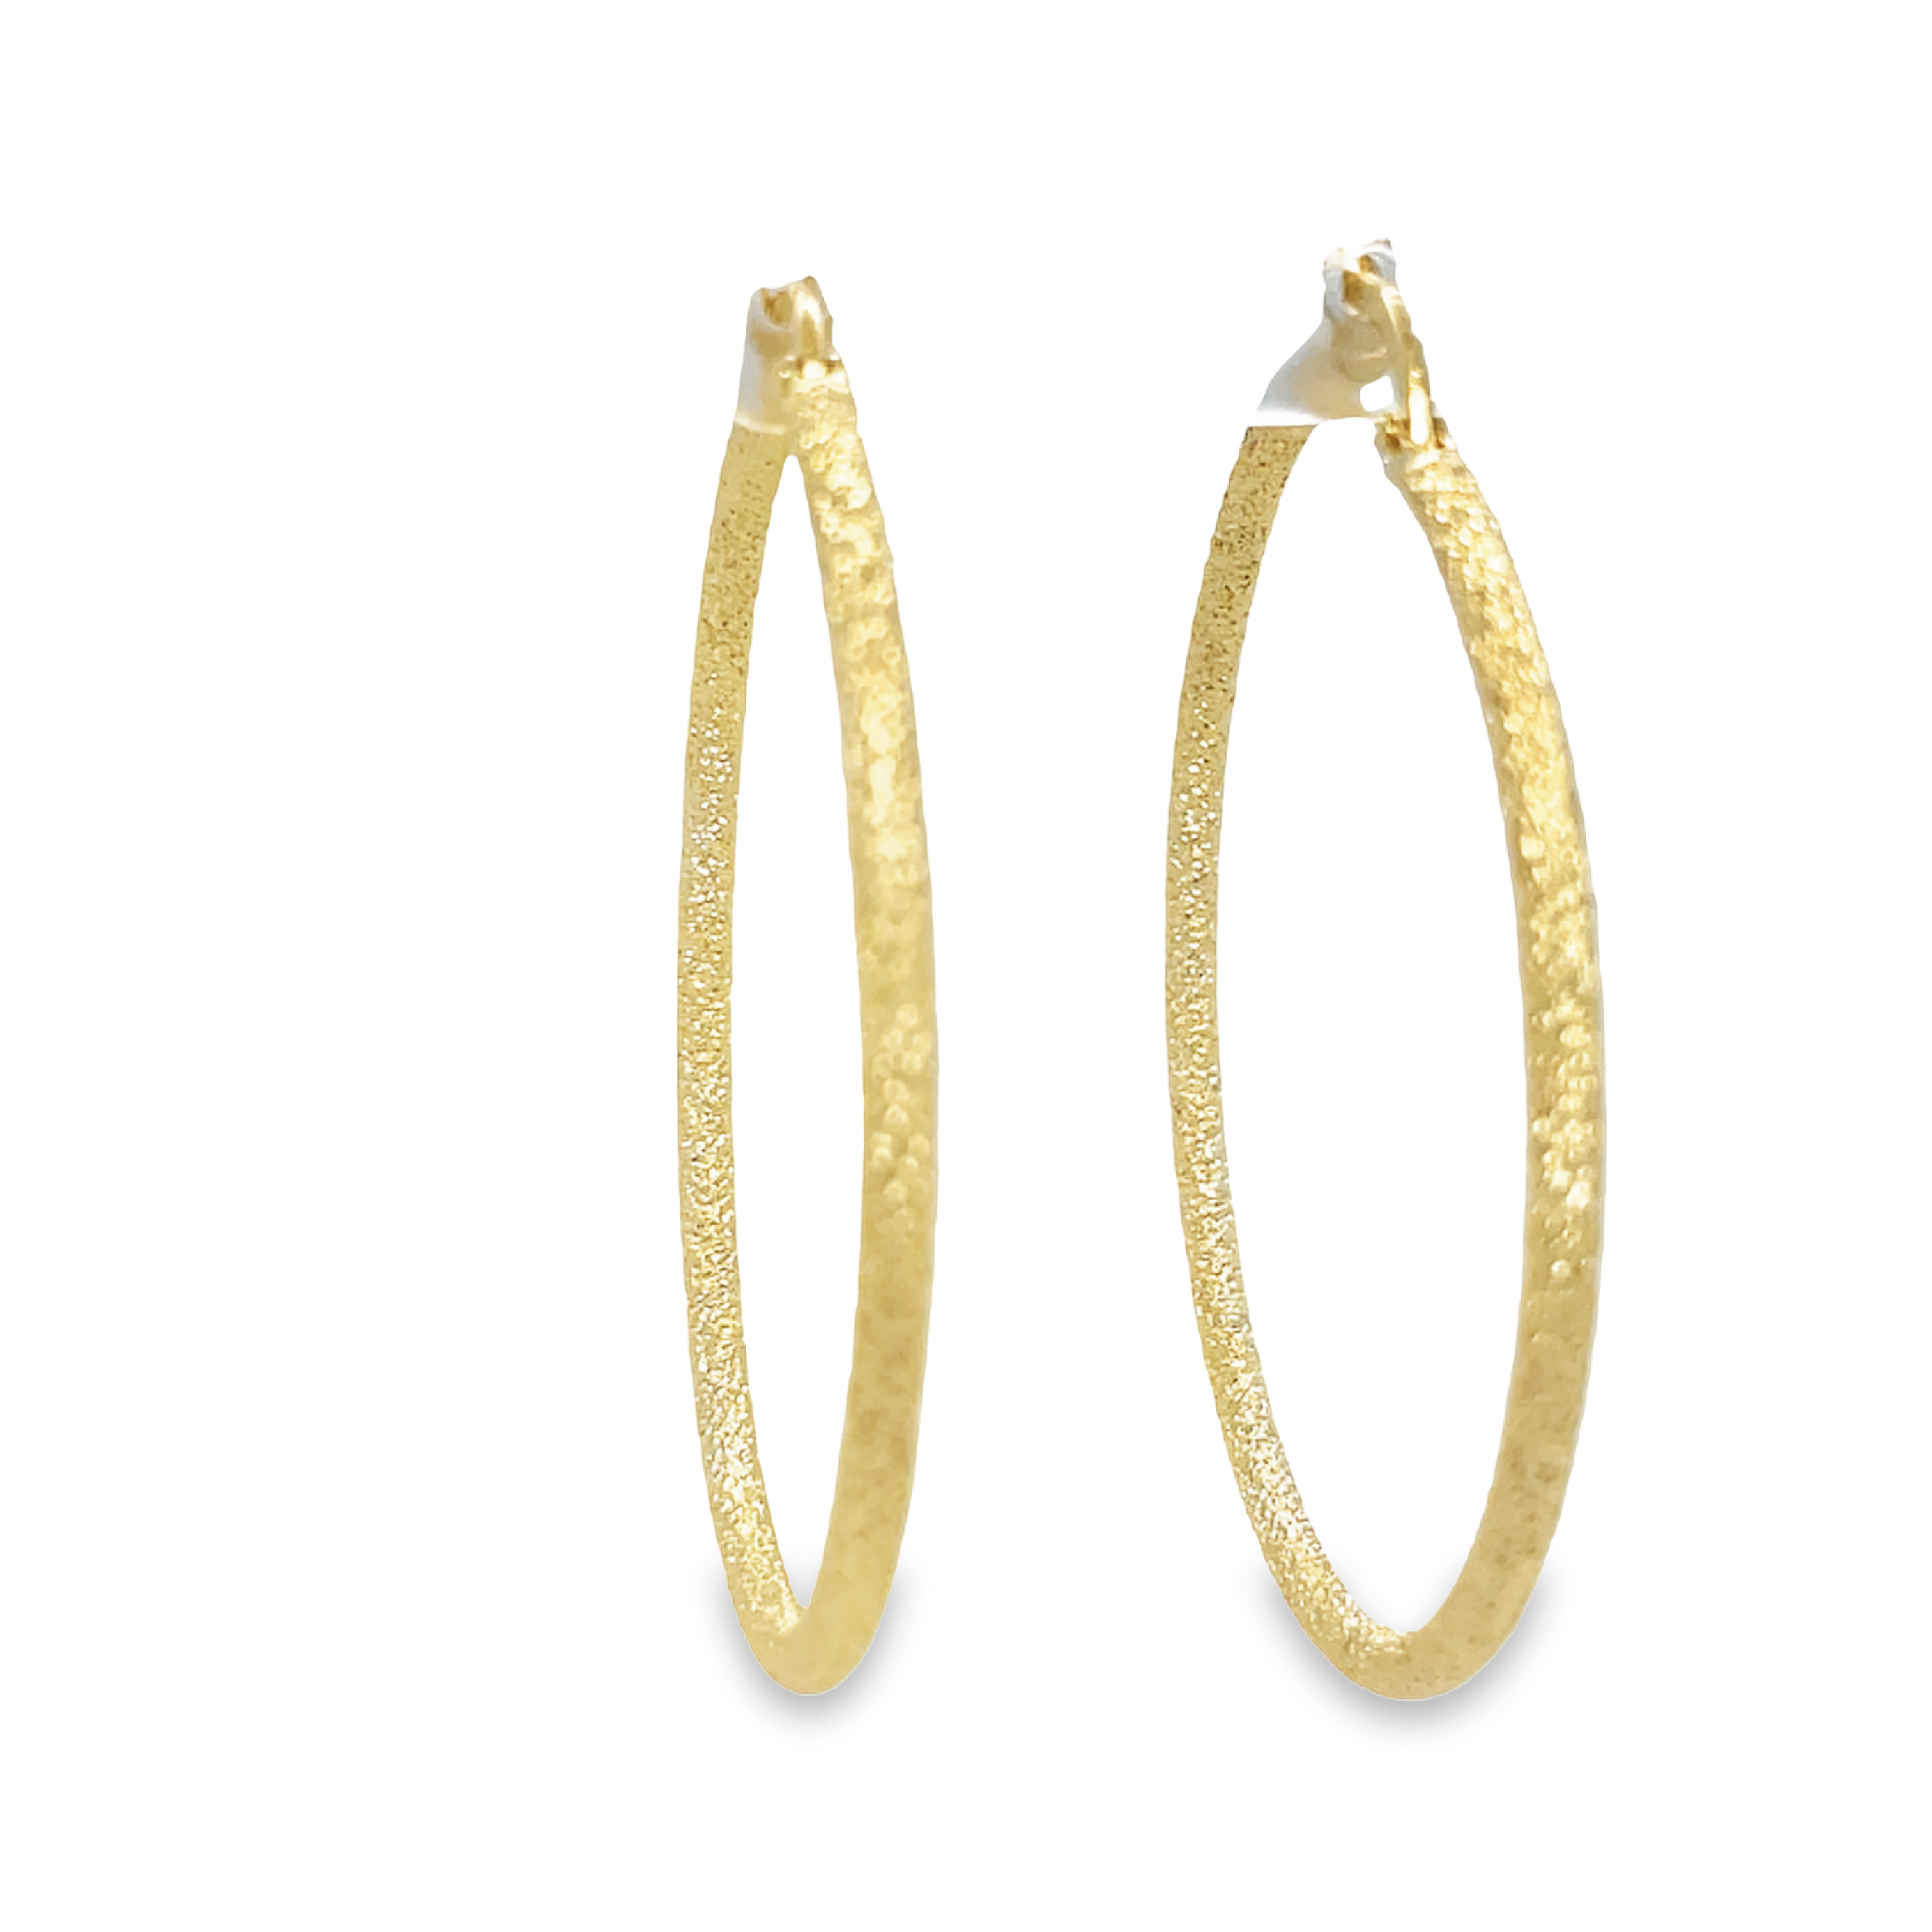 RWCo Matte and Shiny Hoop Earrings  3 Pairs women  Southcentre Mall